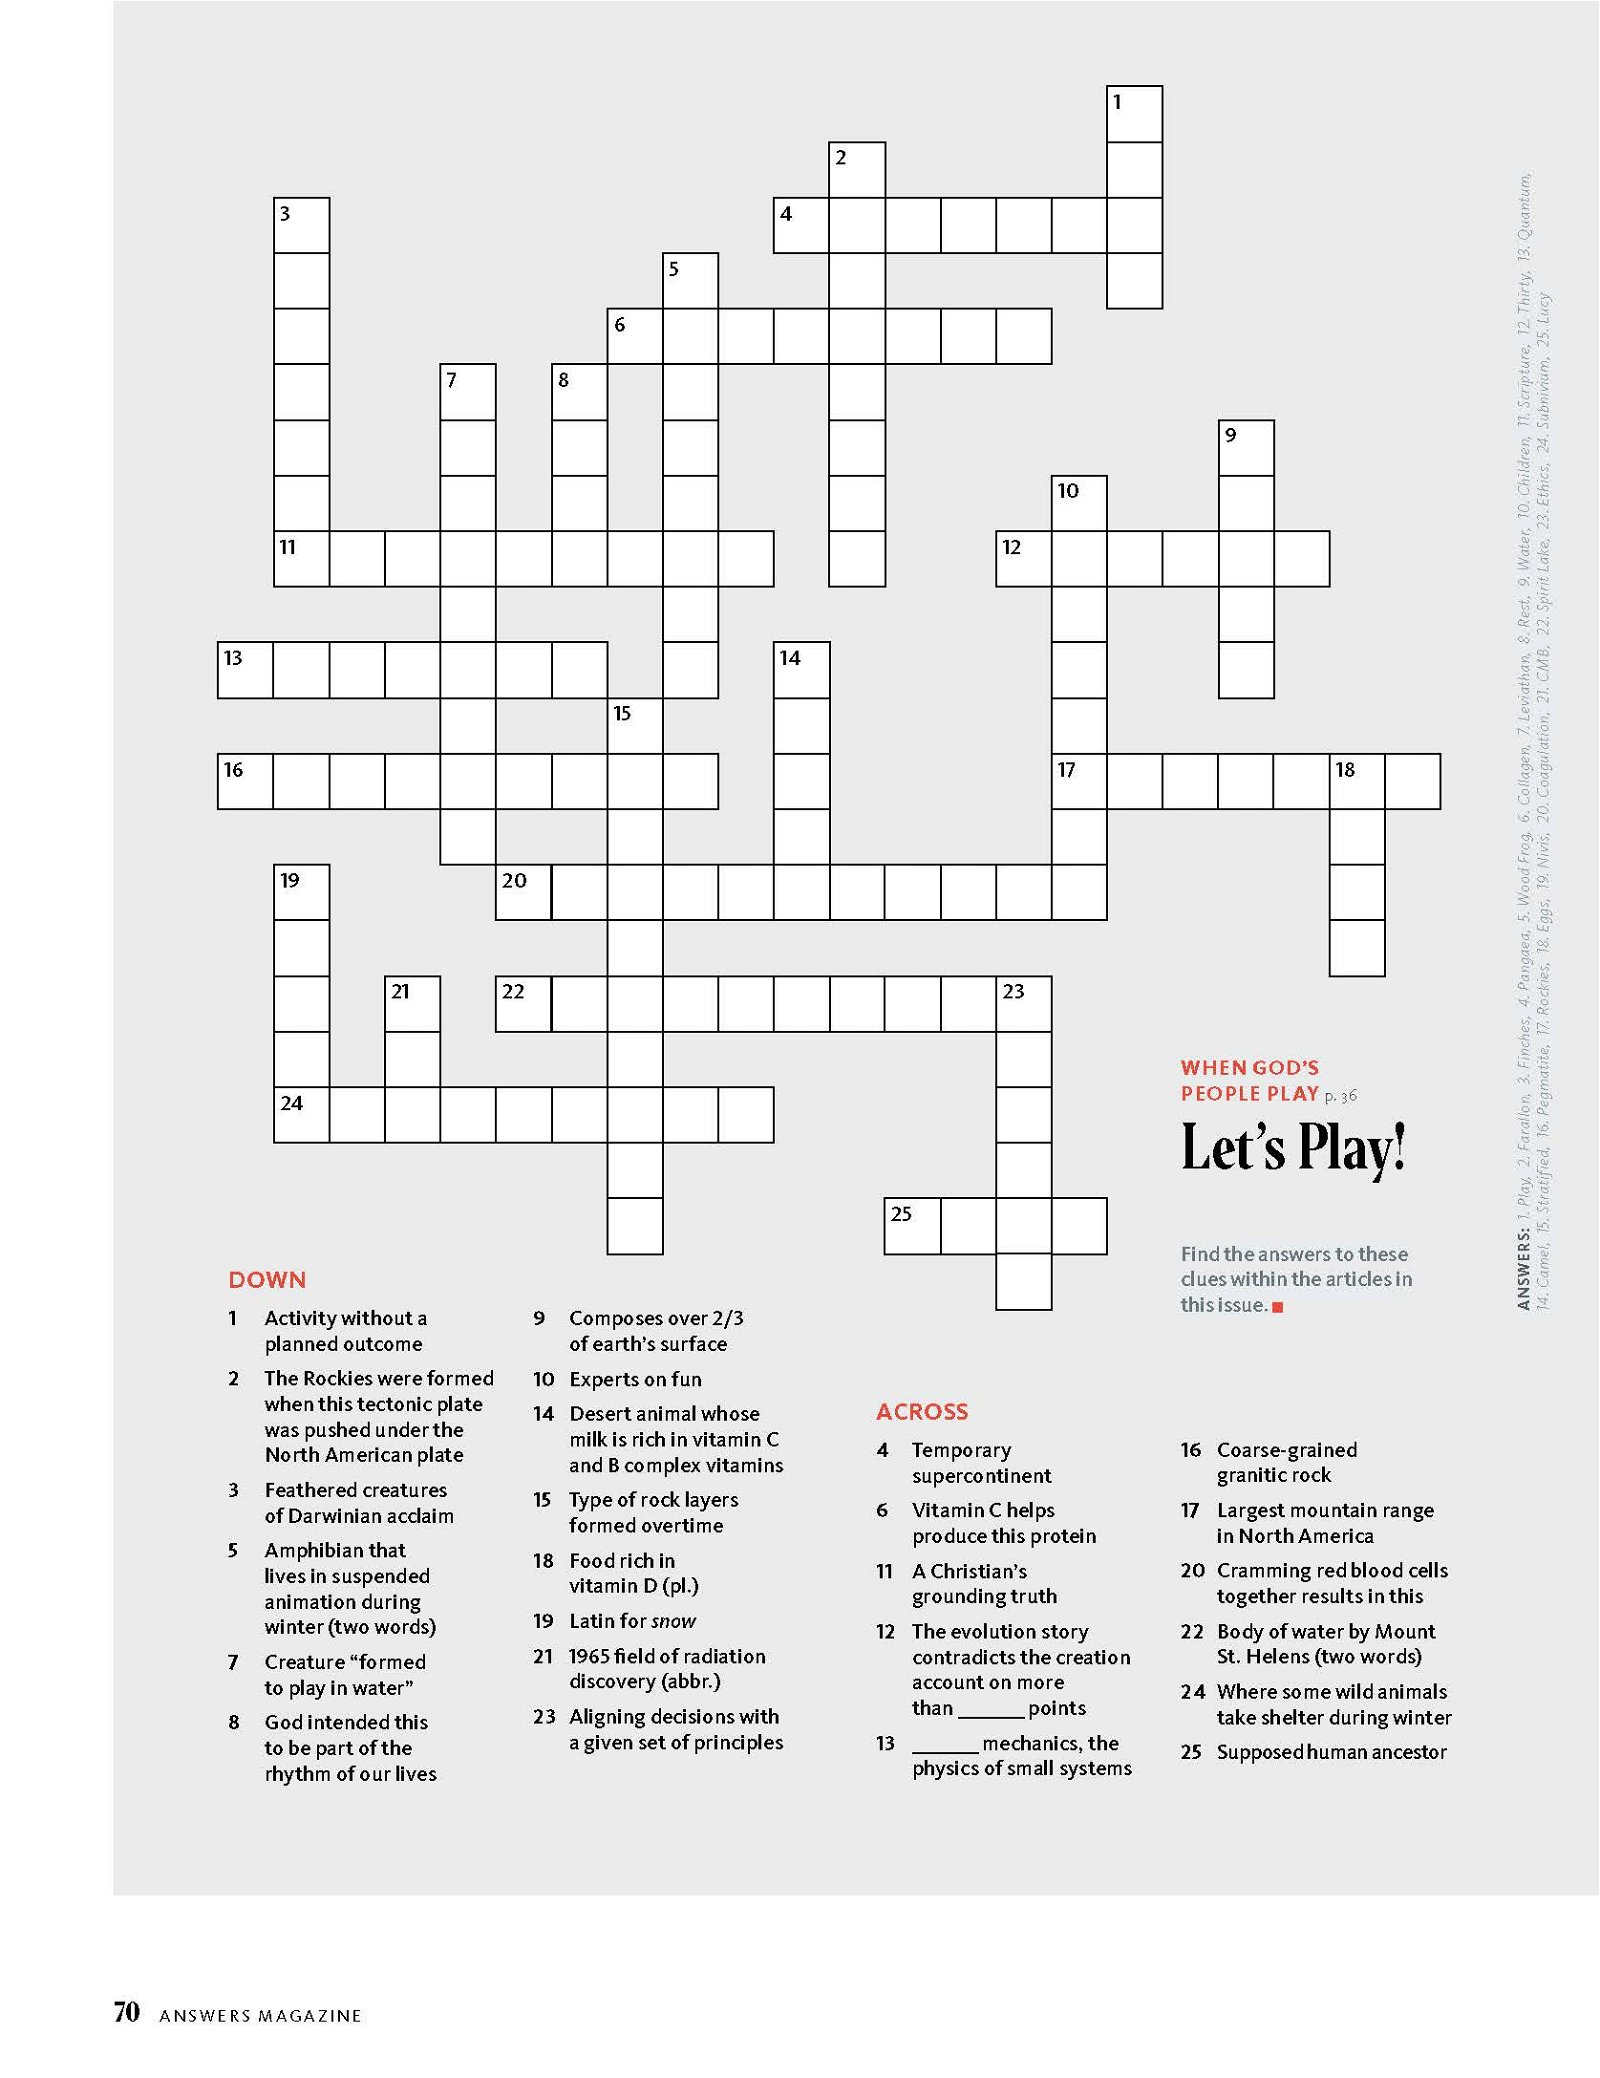 When God’s People Play Crossword Puzzle